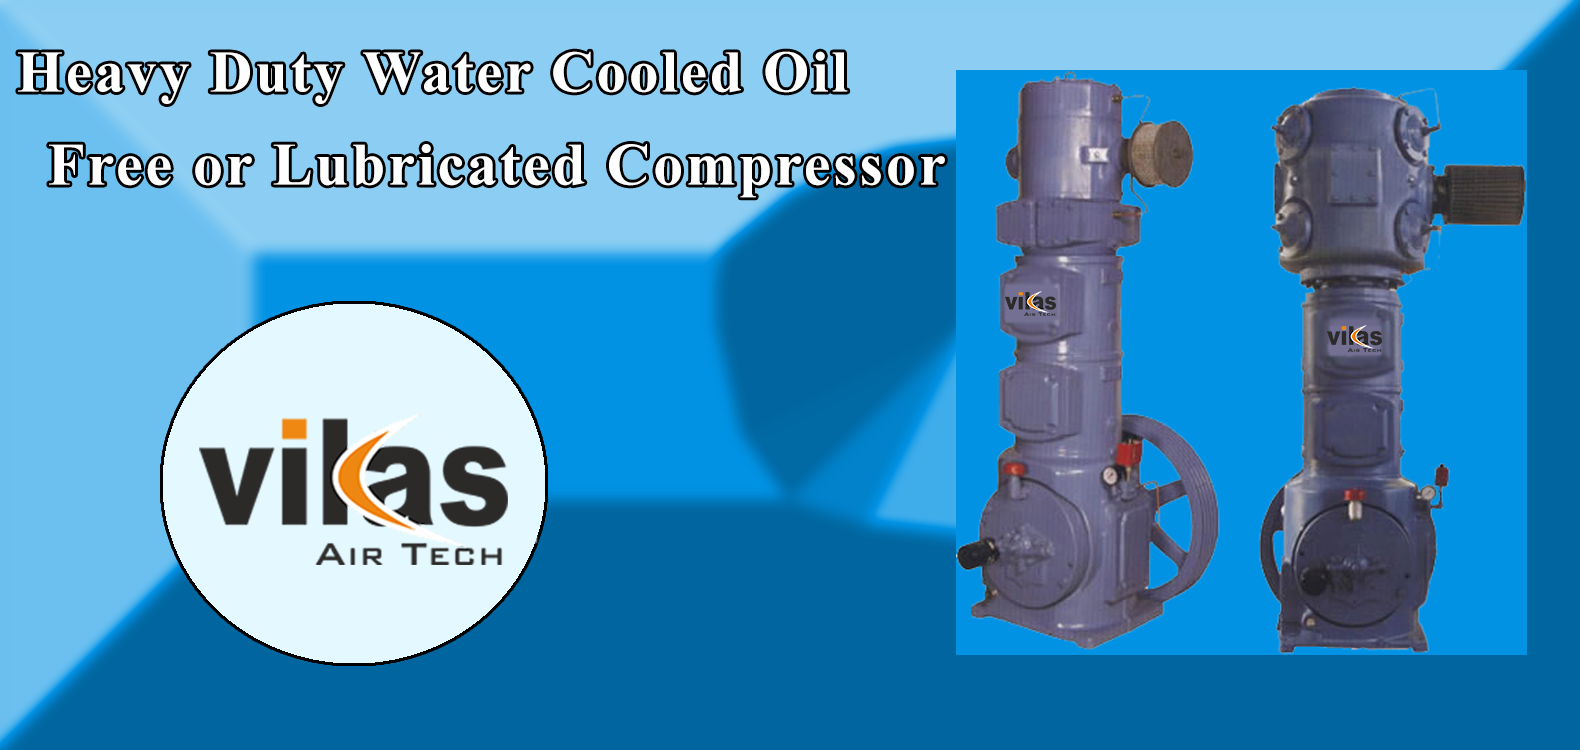 Heavy Duty Water Cooled Oil Lubricated Compressor, Air Compressor Manufacturers in India, Air Compressor Manufacturers in Ahmedabad, Air Compressor Manufacturers in Gujarat